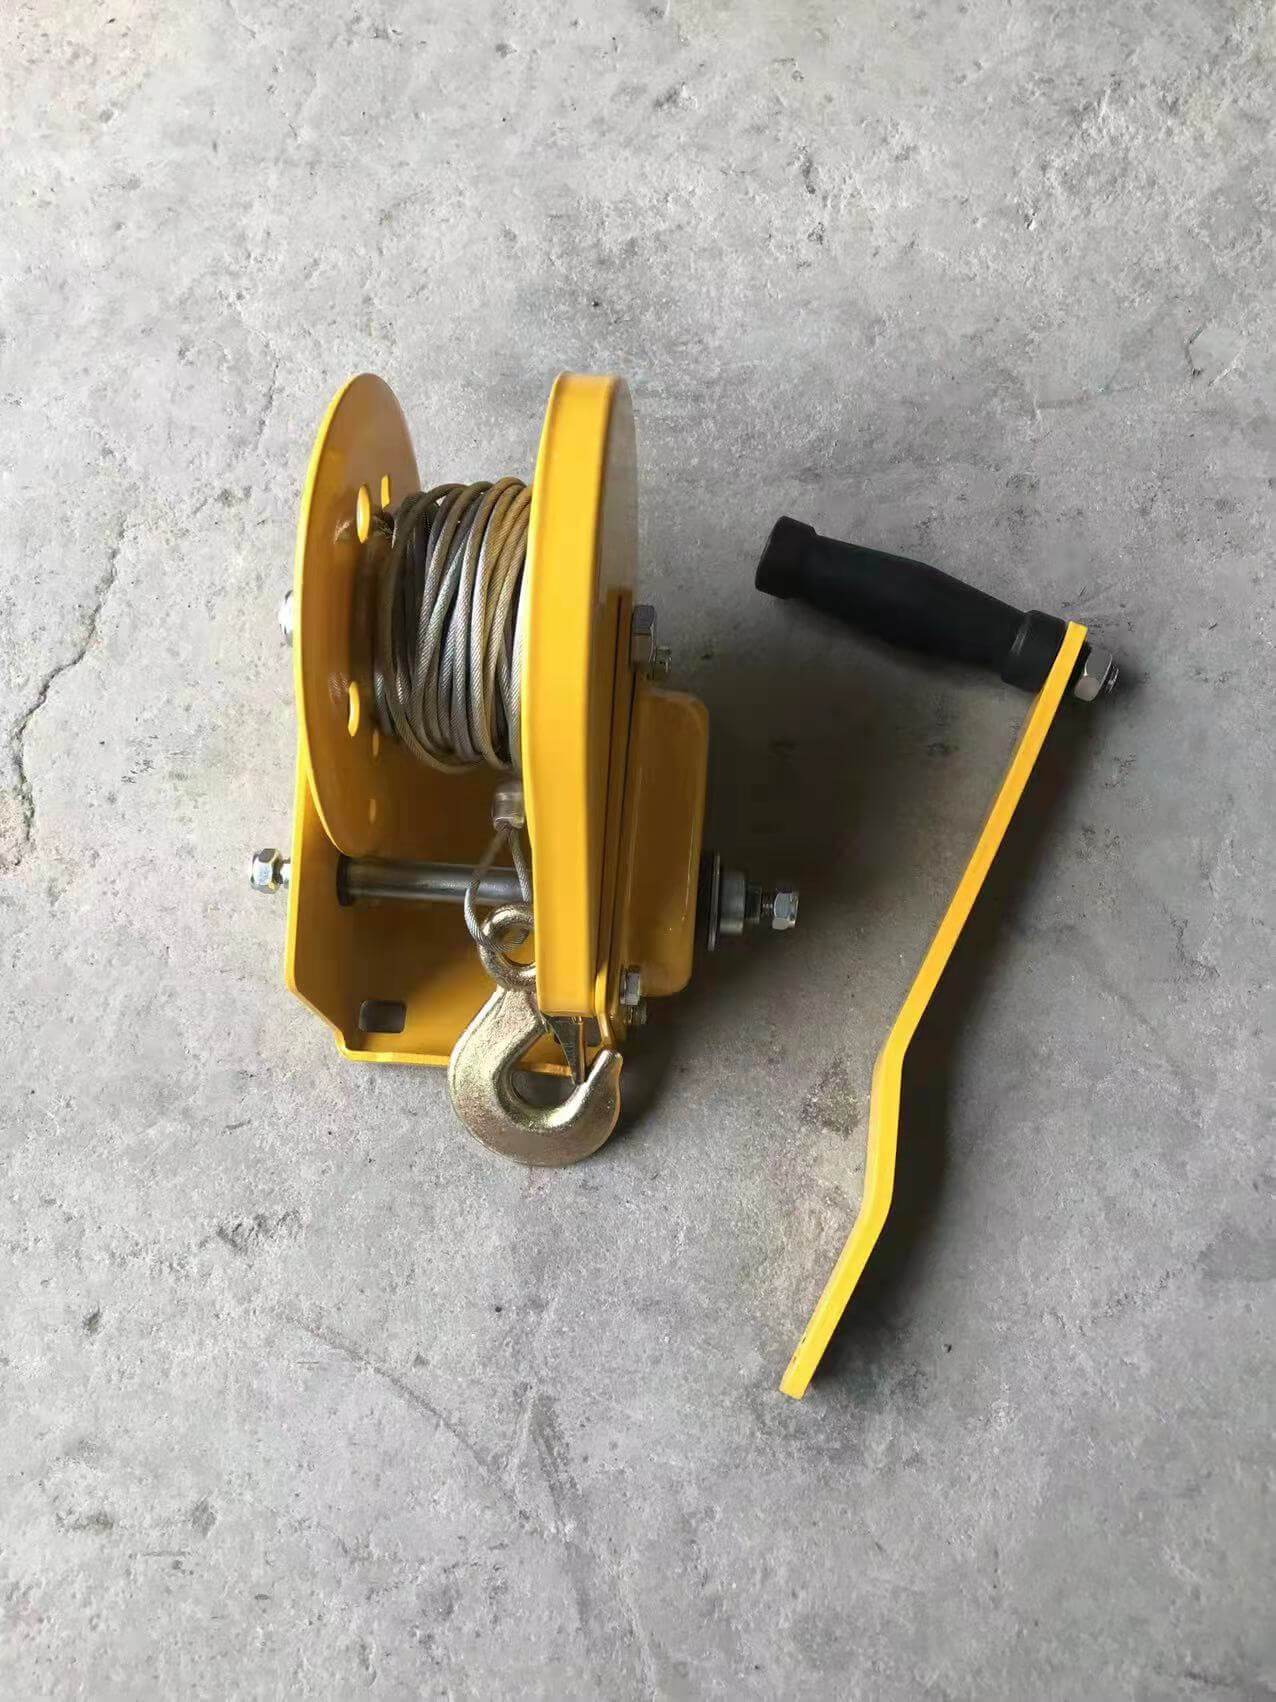 double handle manual winch made in china by RAMHOIST-1.jpg